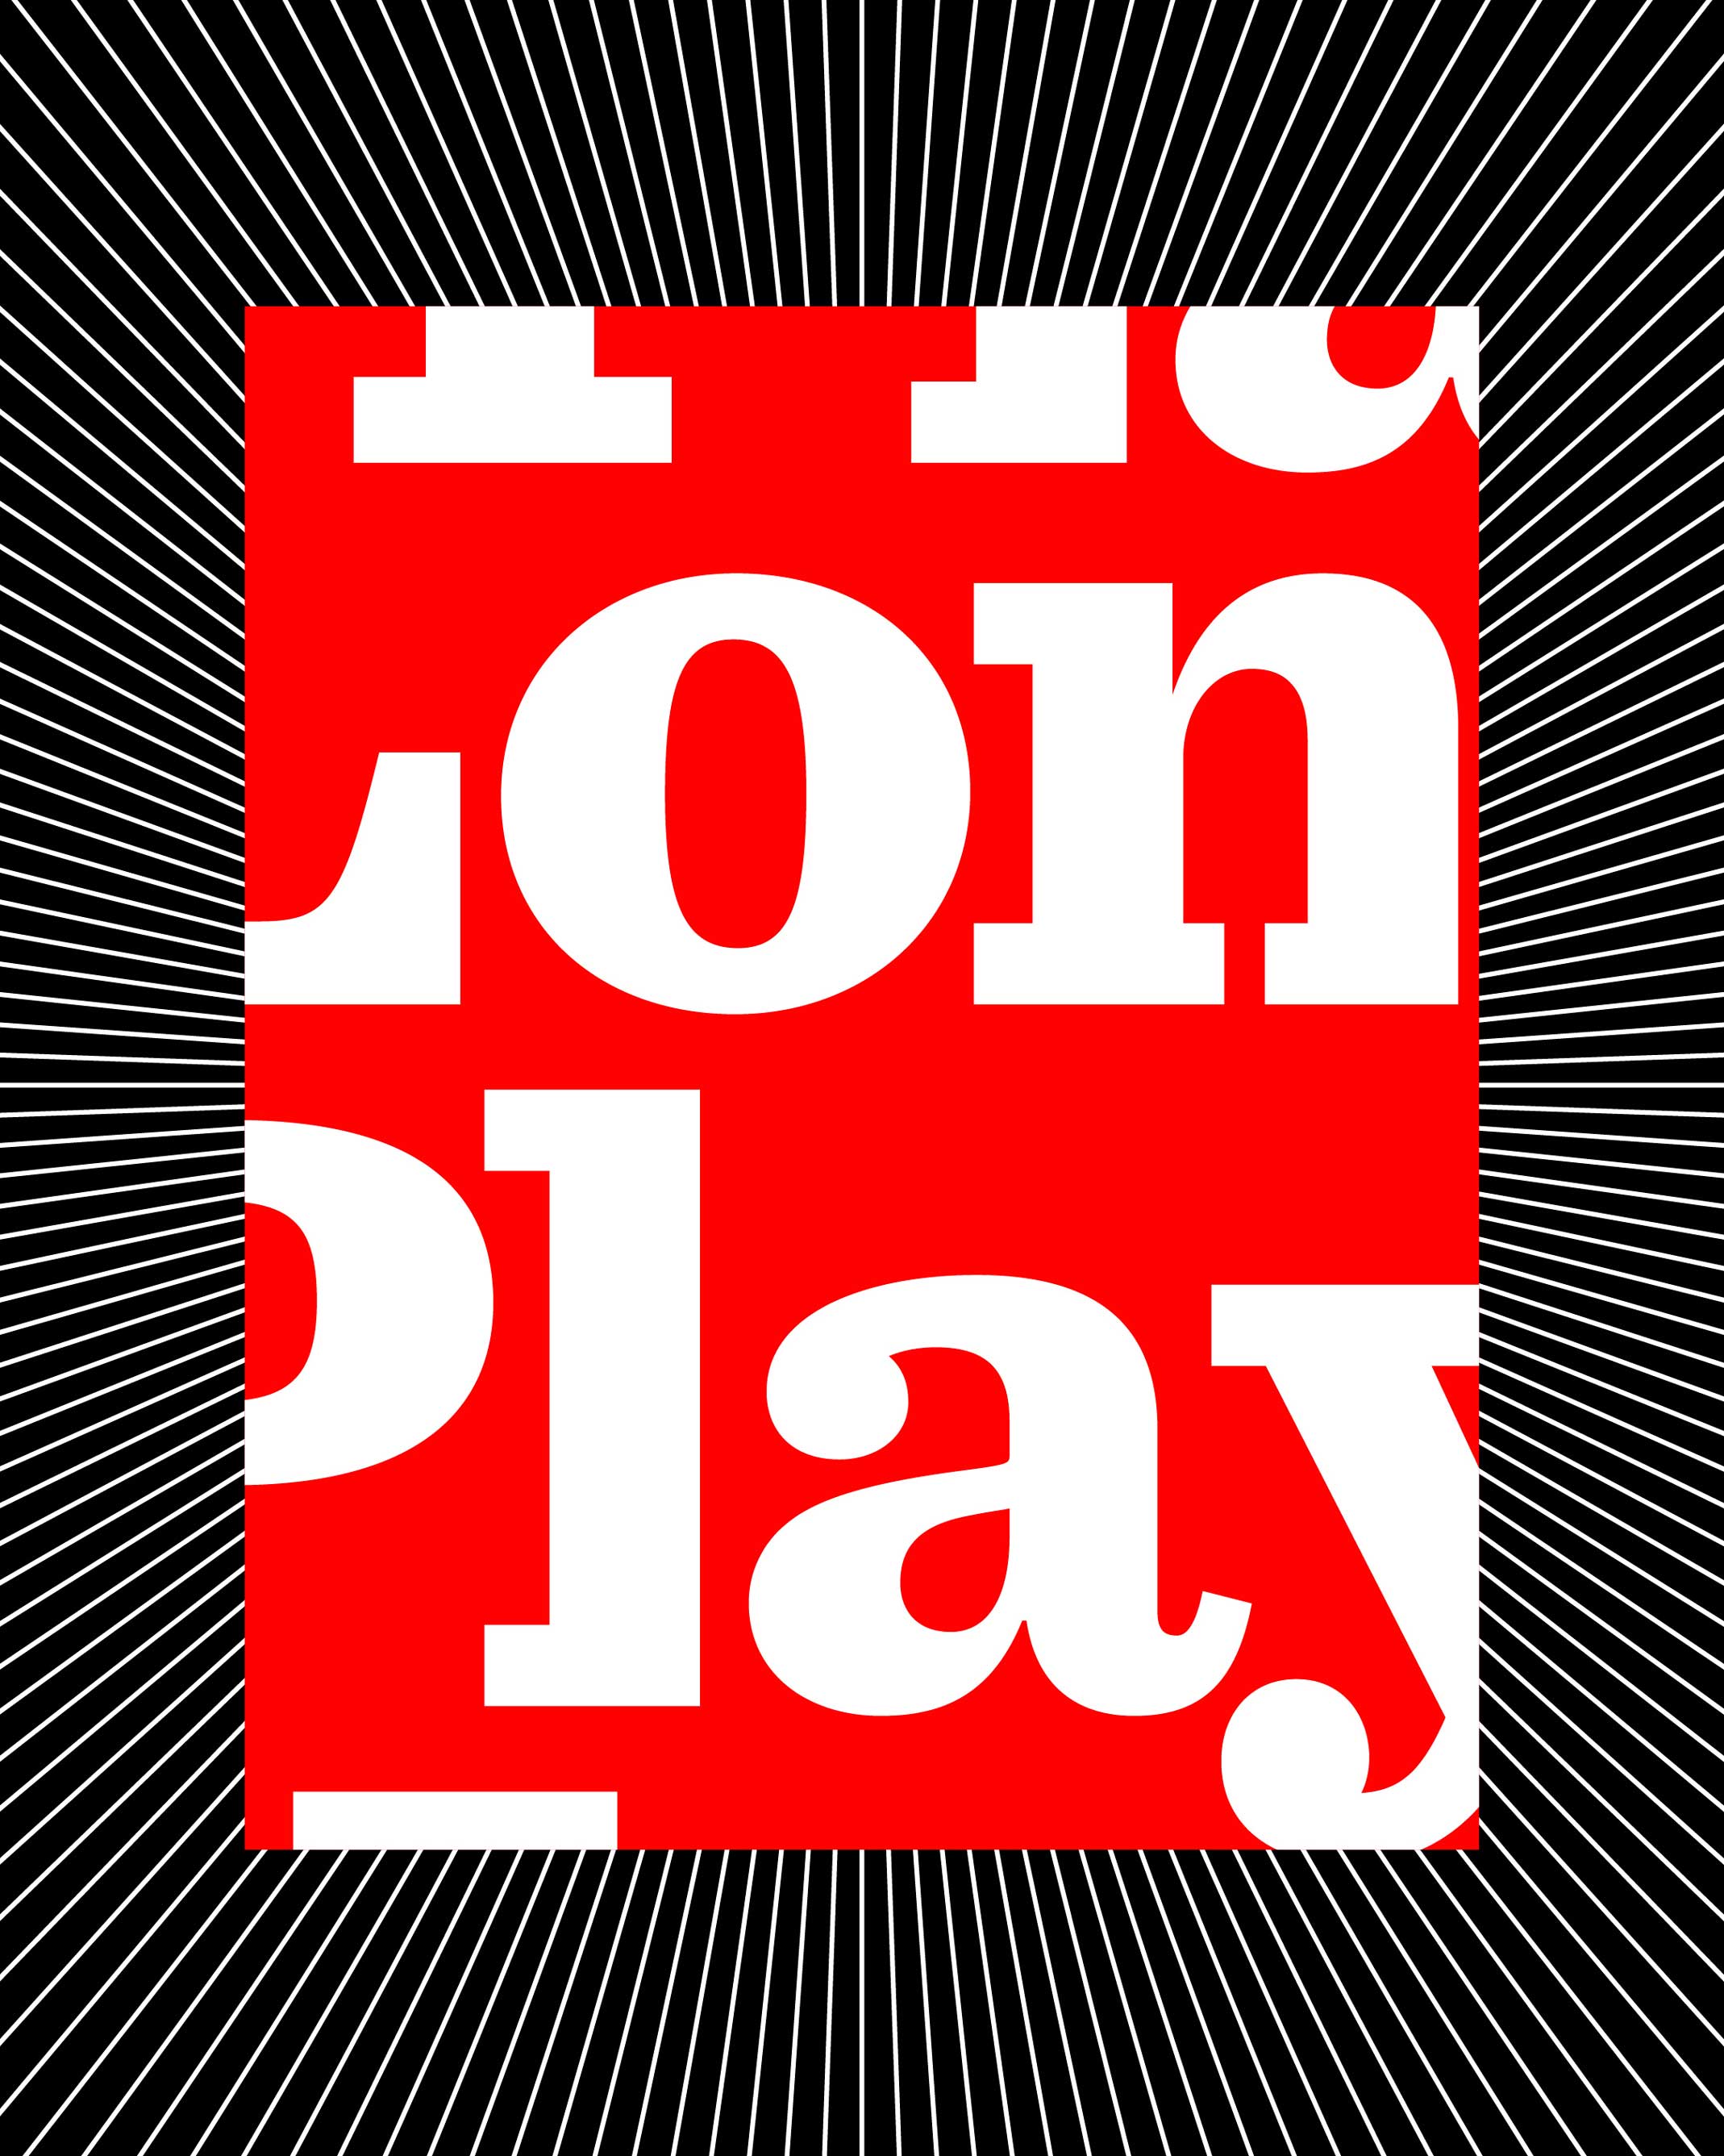 Long Play - Graphic design by Tero Ahonen